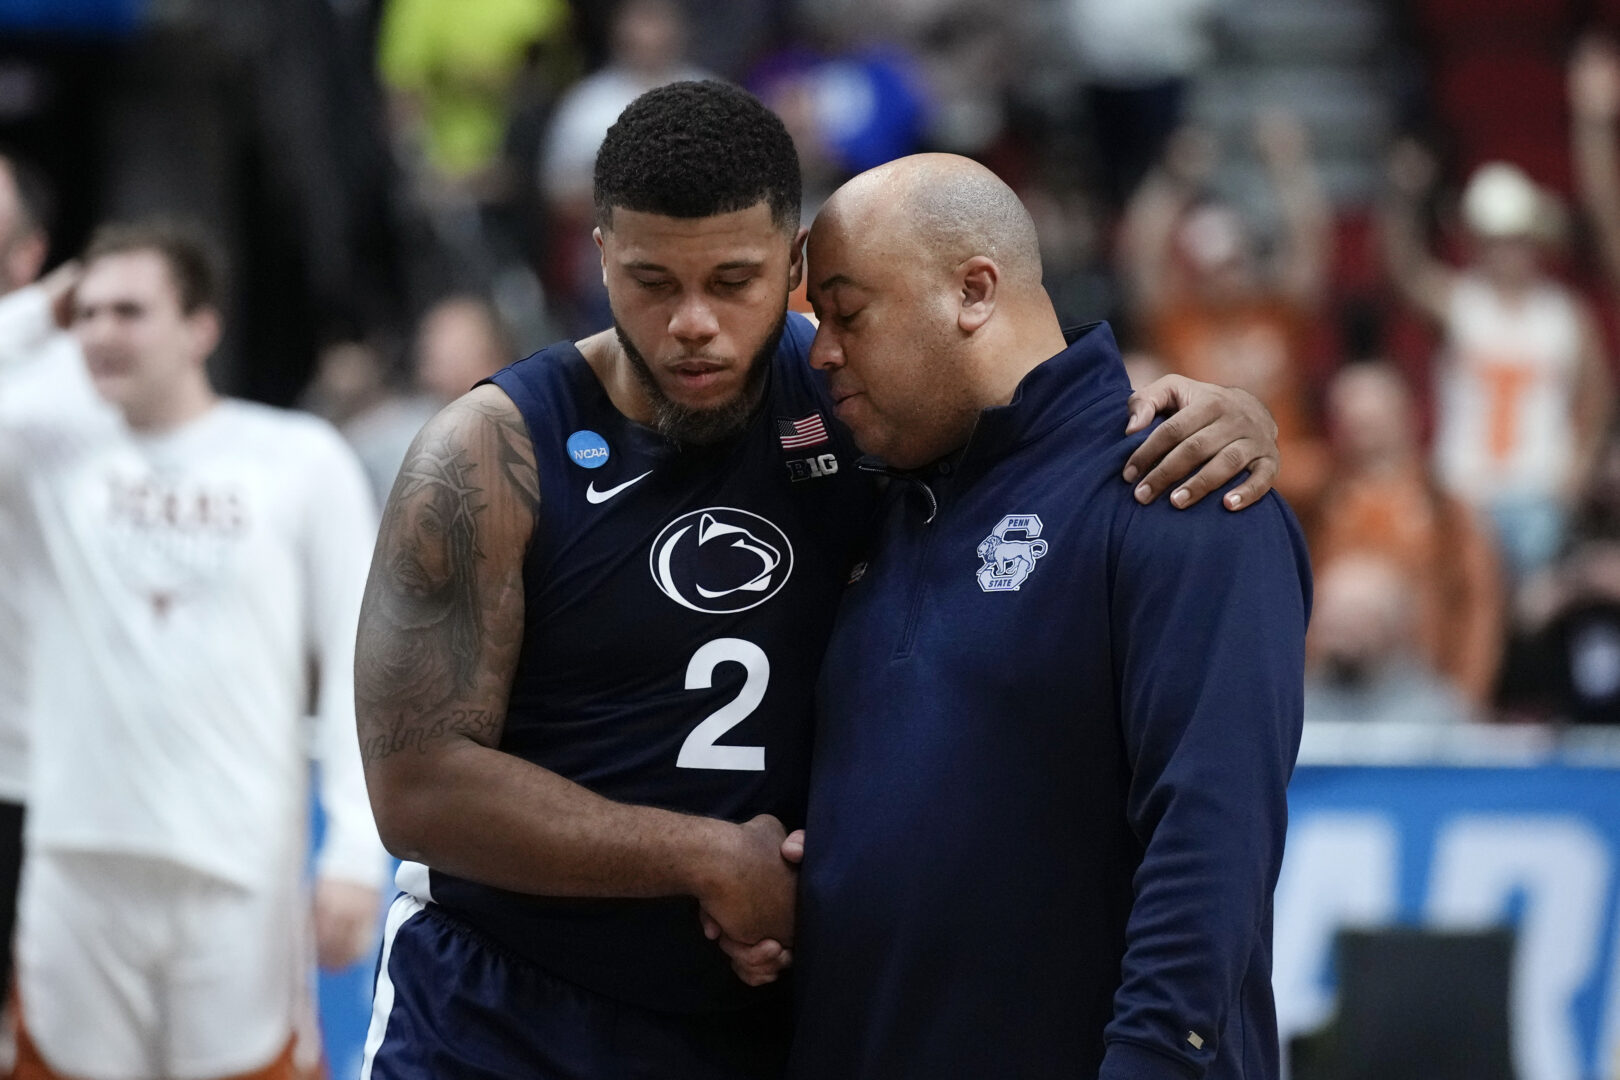 Penn State head coach Micah Shrewsberry walks off the court with guard Myles Dread (2) after a second-round college basketball game against Texas in the NCAA Tournament, Saturday, March 18, 2023, in Des Moines, Iowa. (AP Photo/Charlie Neibergall)